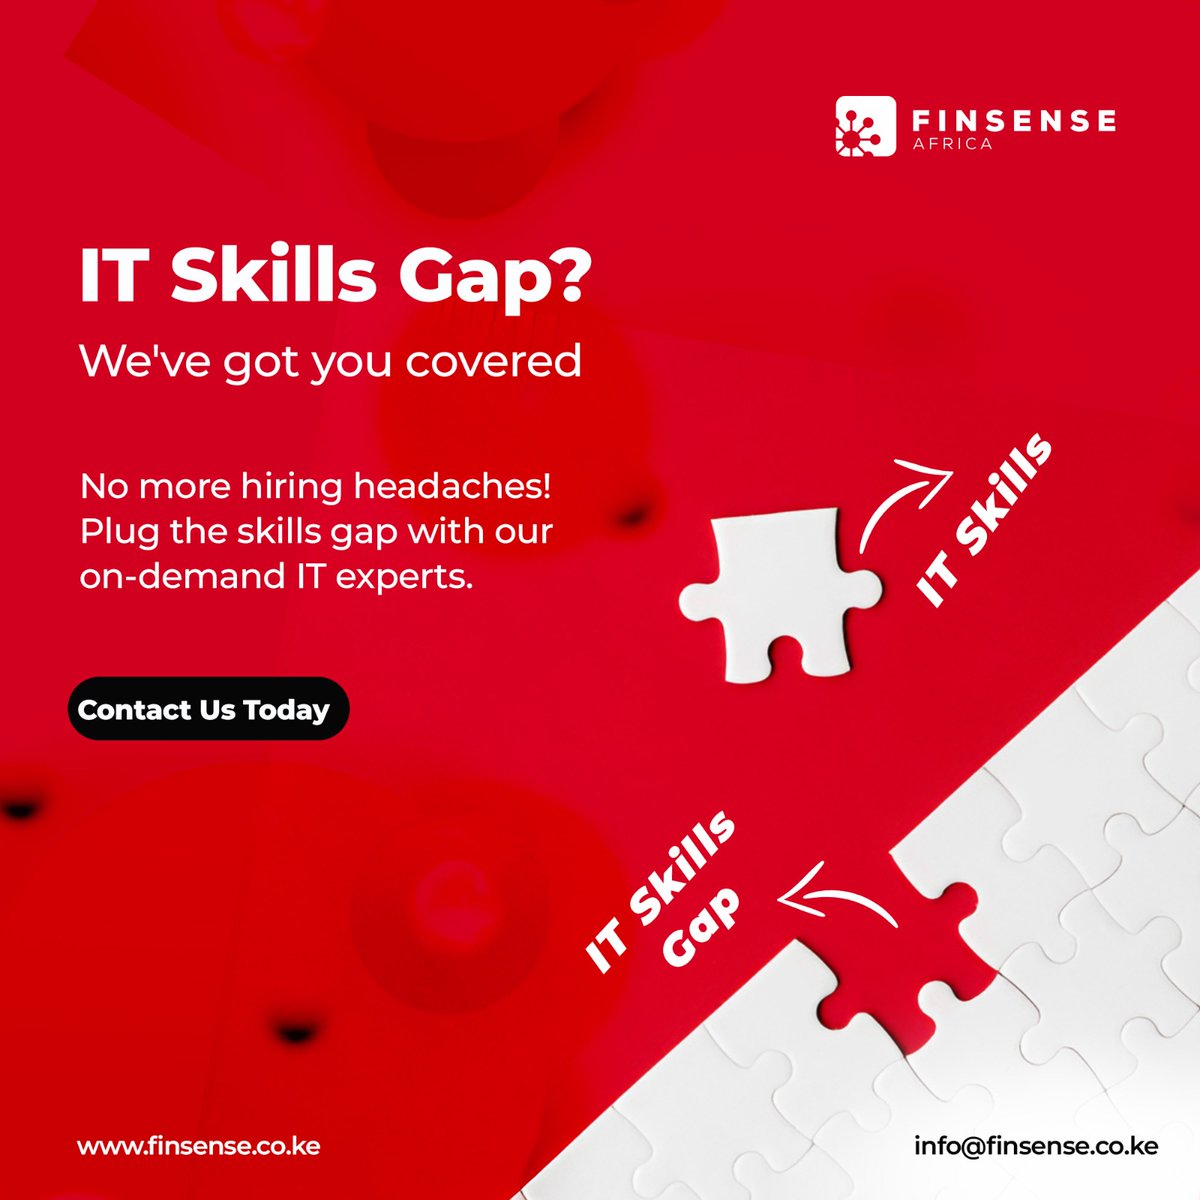 Is your business struggling to find the IT talent it needs? Let's chat! We can help you identify skill gaps and develop a plan to bridge them. Contact us at info@finsense.co.ke #ITstaffing #skillsgap